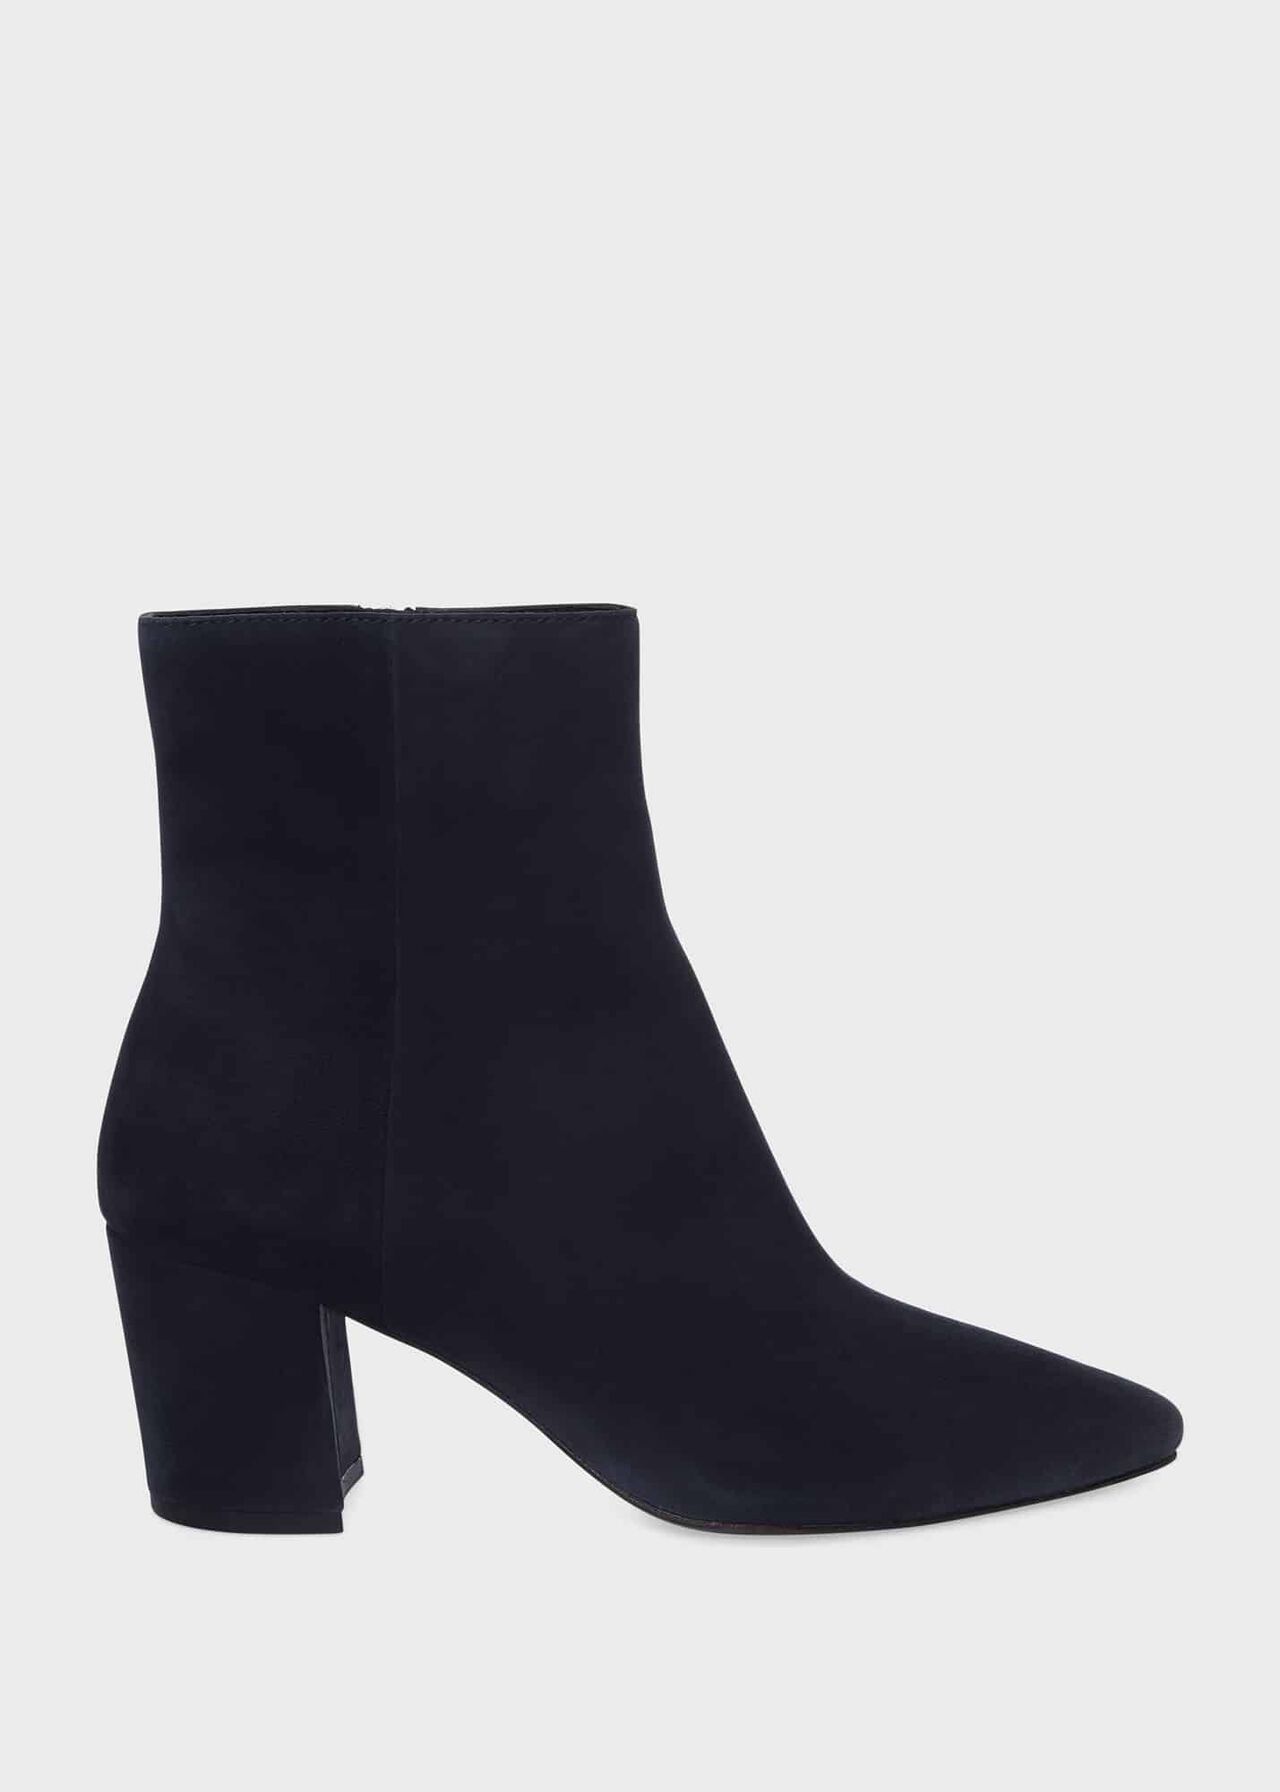 Lyra Ankle Boots | Hobbs UK